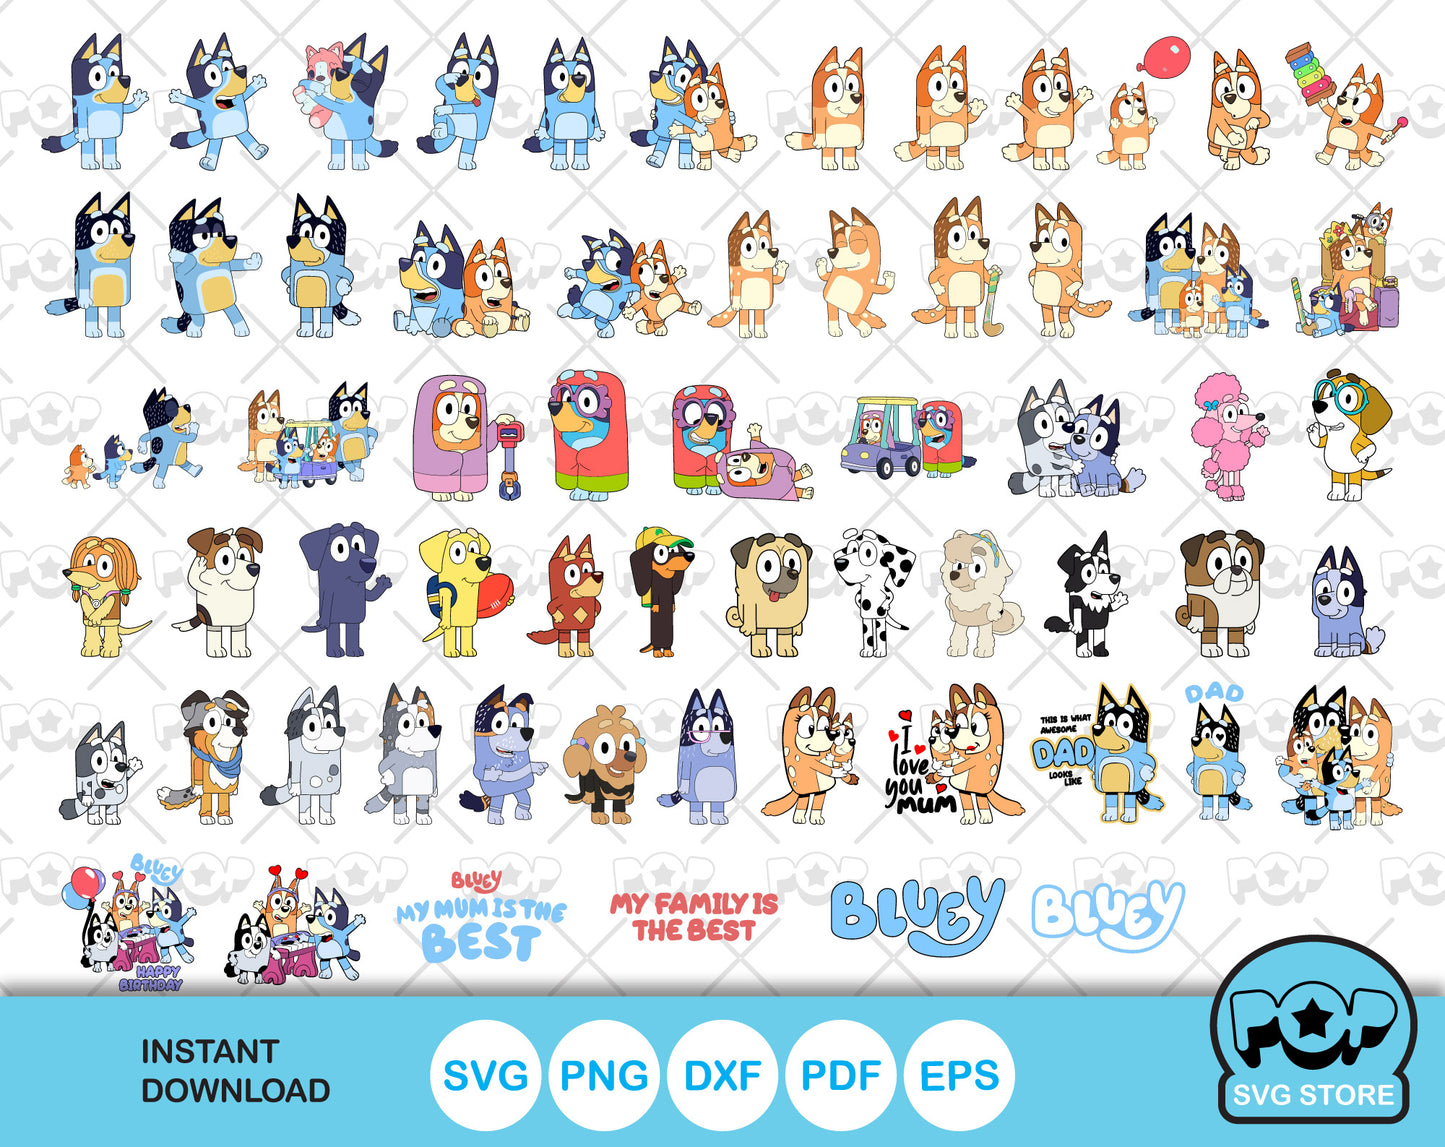 Bluey 100 cliparts set + alphabet, Bluey the dog SVG cut files for Cricut / Silhouette, PNG DXF, instant download